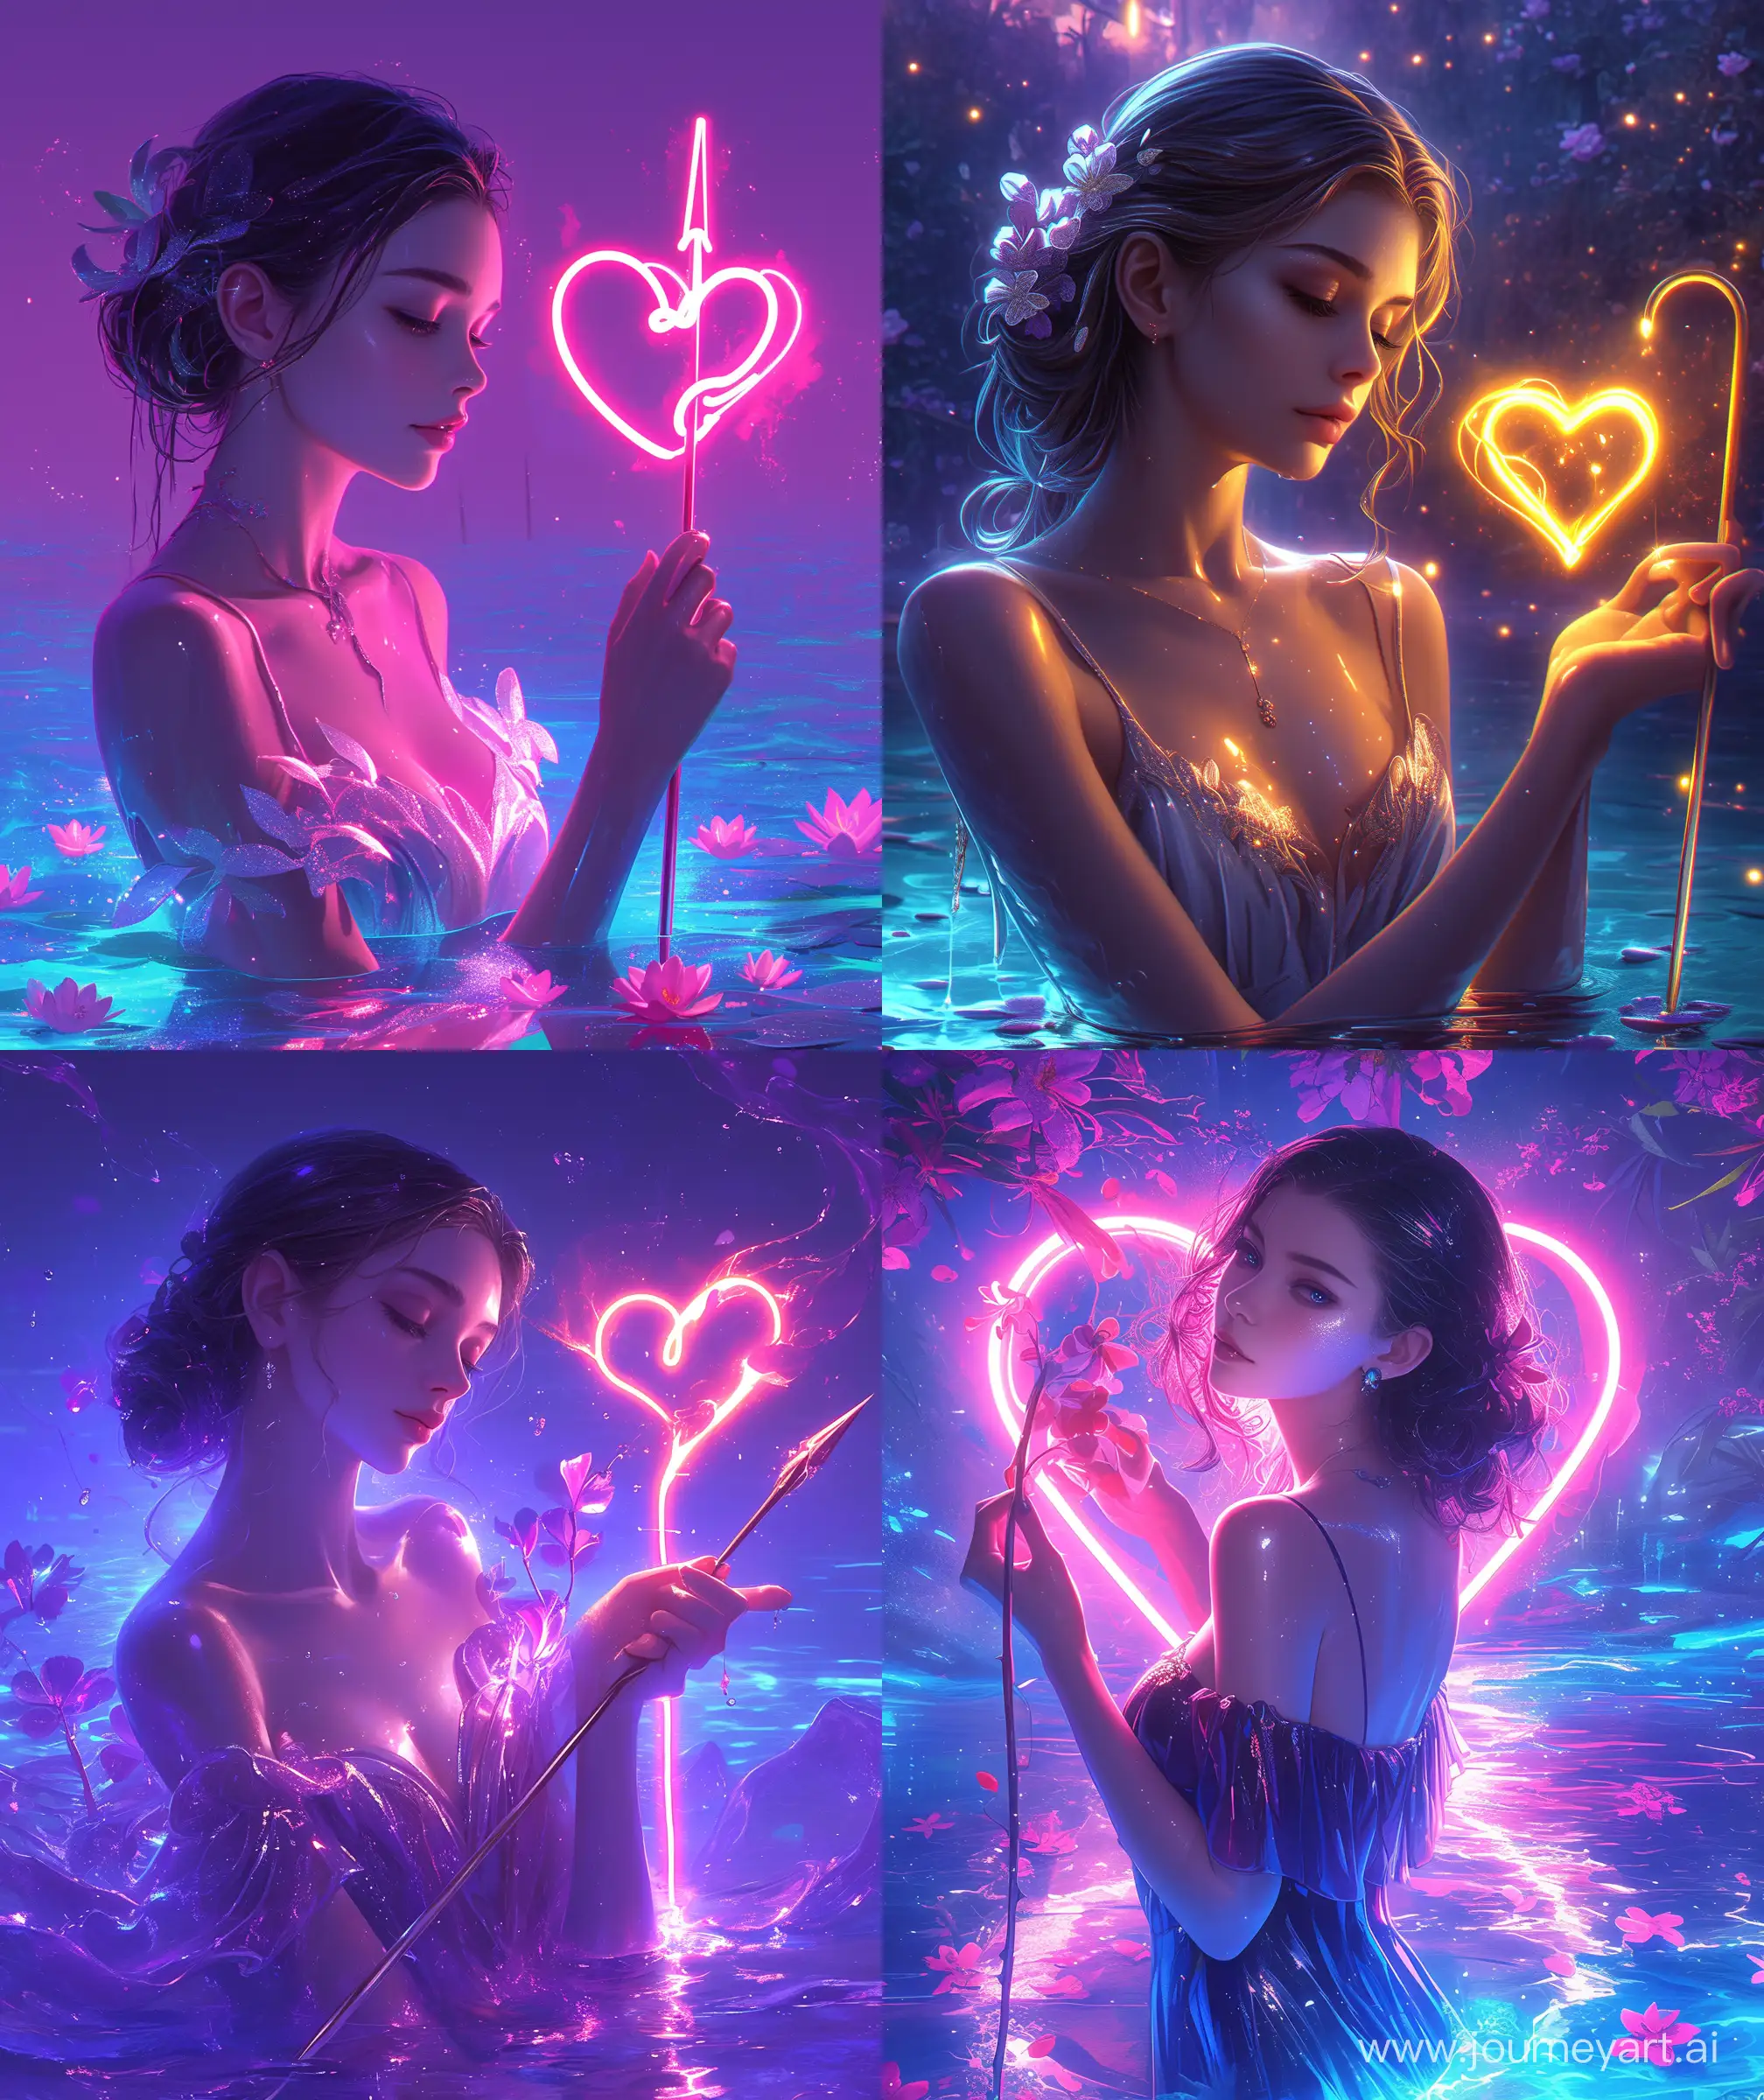 Beautiful woman, illustration of woman holding a glowing neon heart spears with her hand, glistening look, calm facial look, glossy upper body, neon flowers around her heart, beautiful magical view, glowing neon water, beautiful dress wearing, --ar 27:32 --niji 6